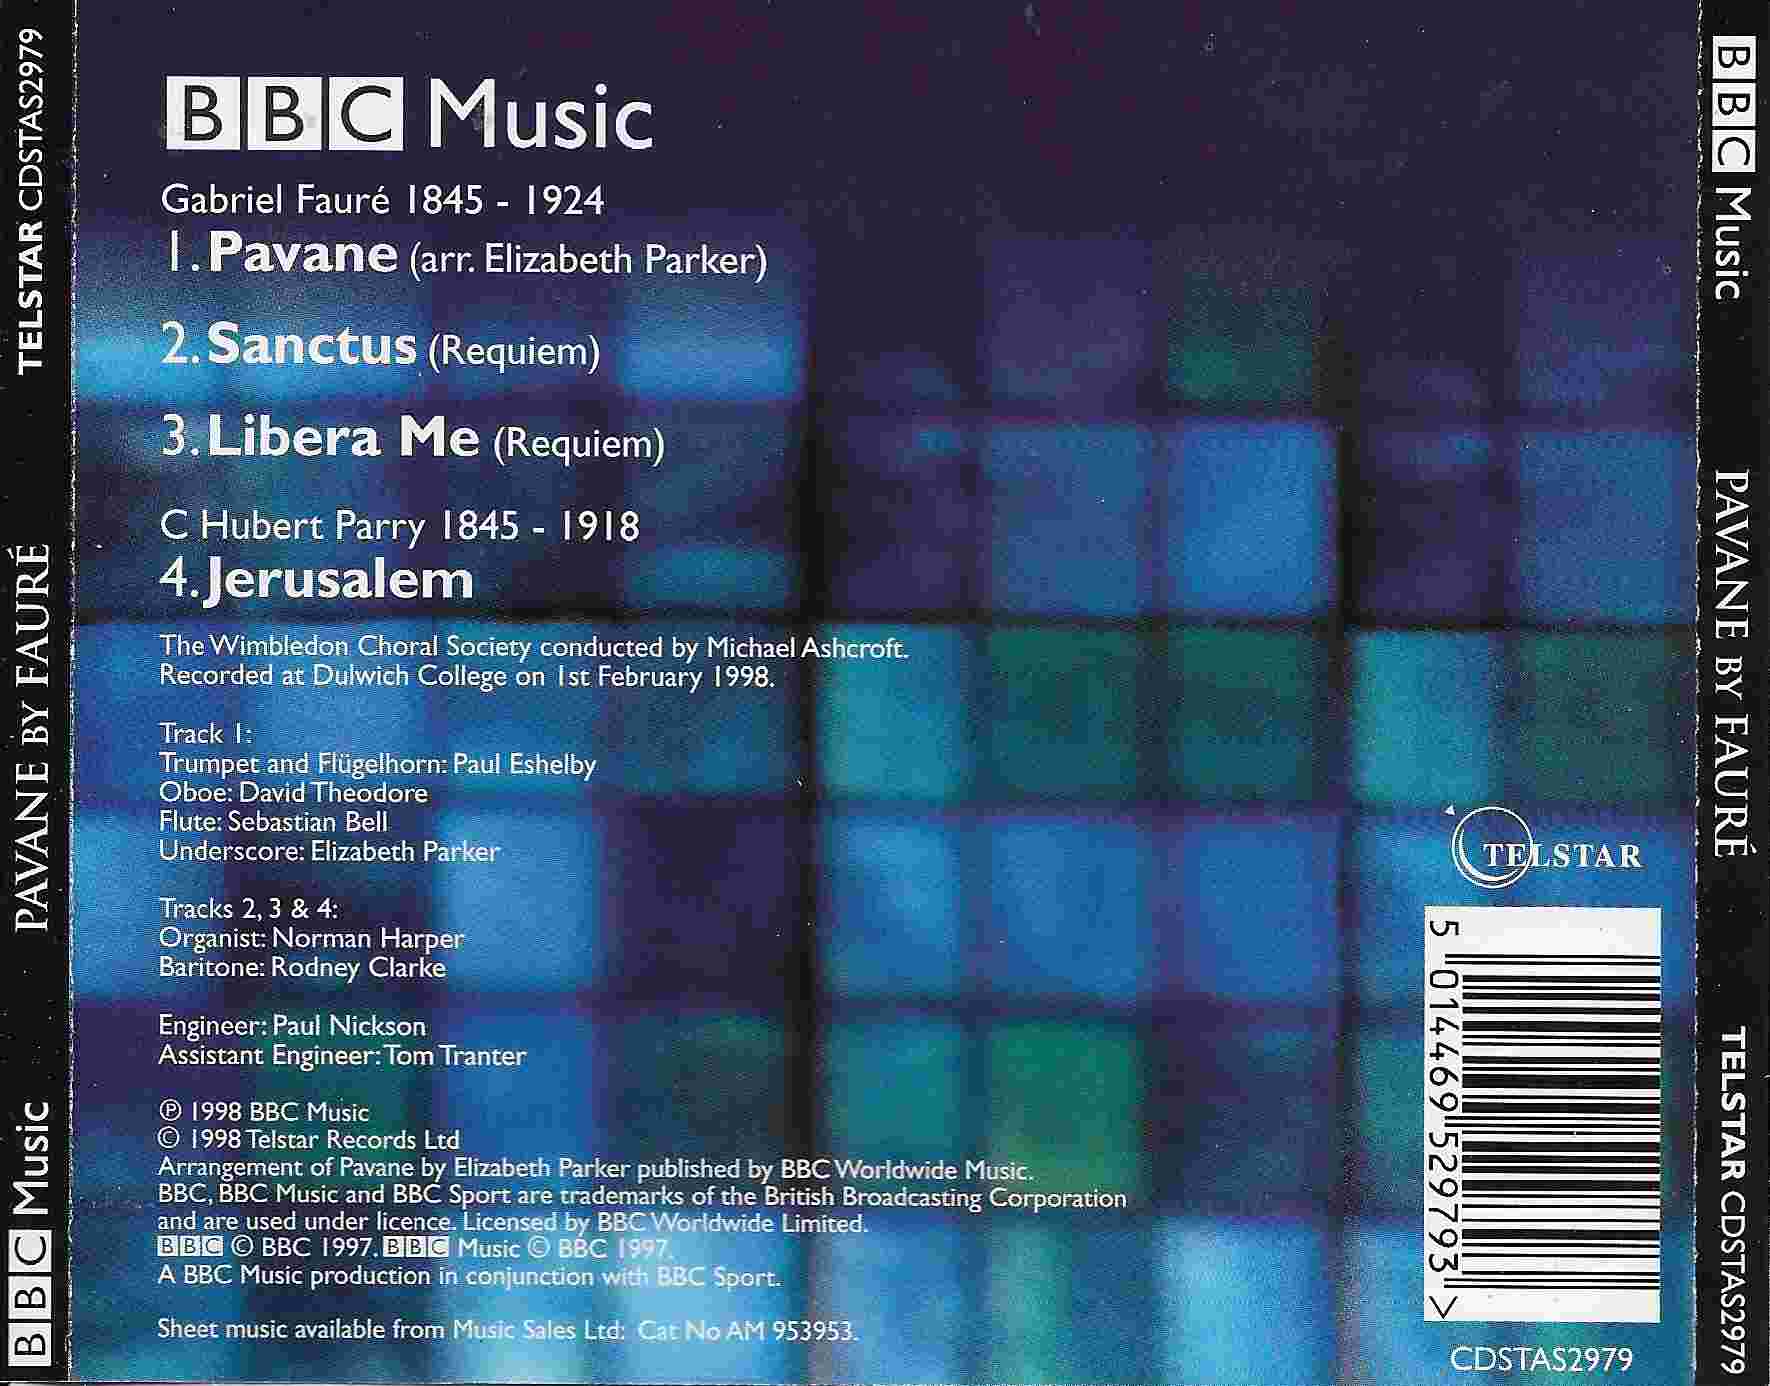 Picture of CDSTAS 2979 Pavane (World Cup '98) by artist Gabriel Faure / Arr. Elizabeth Parker / The Wimbledon Choral Society from the BBC records and Tapes library